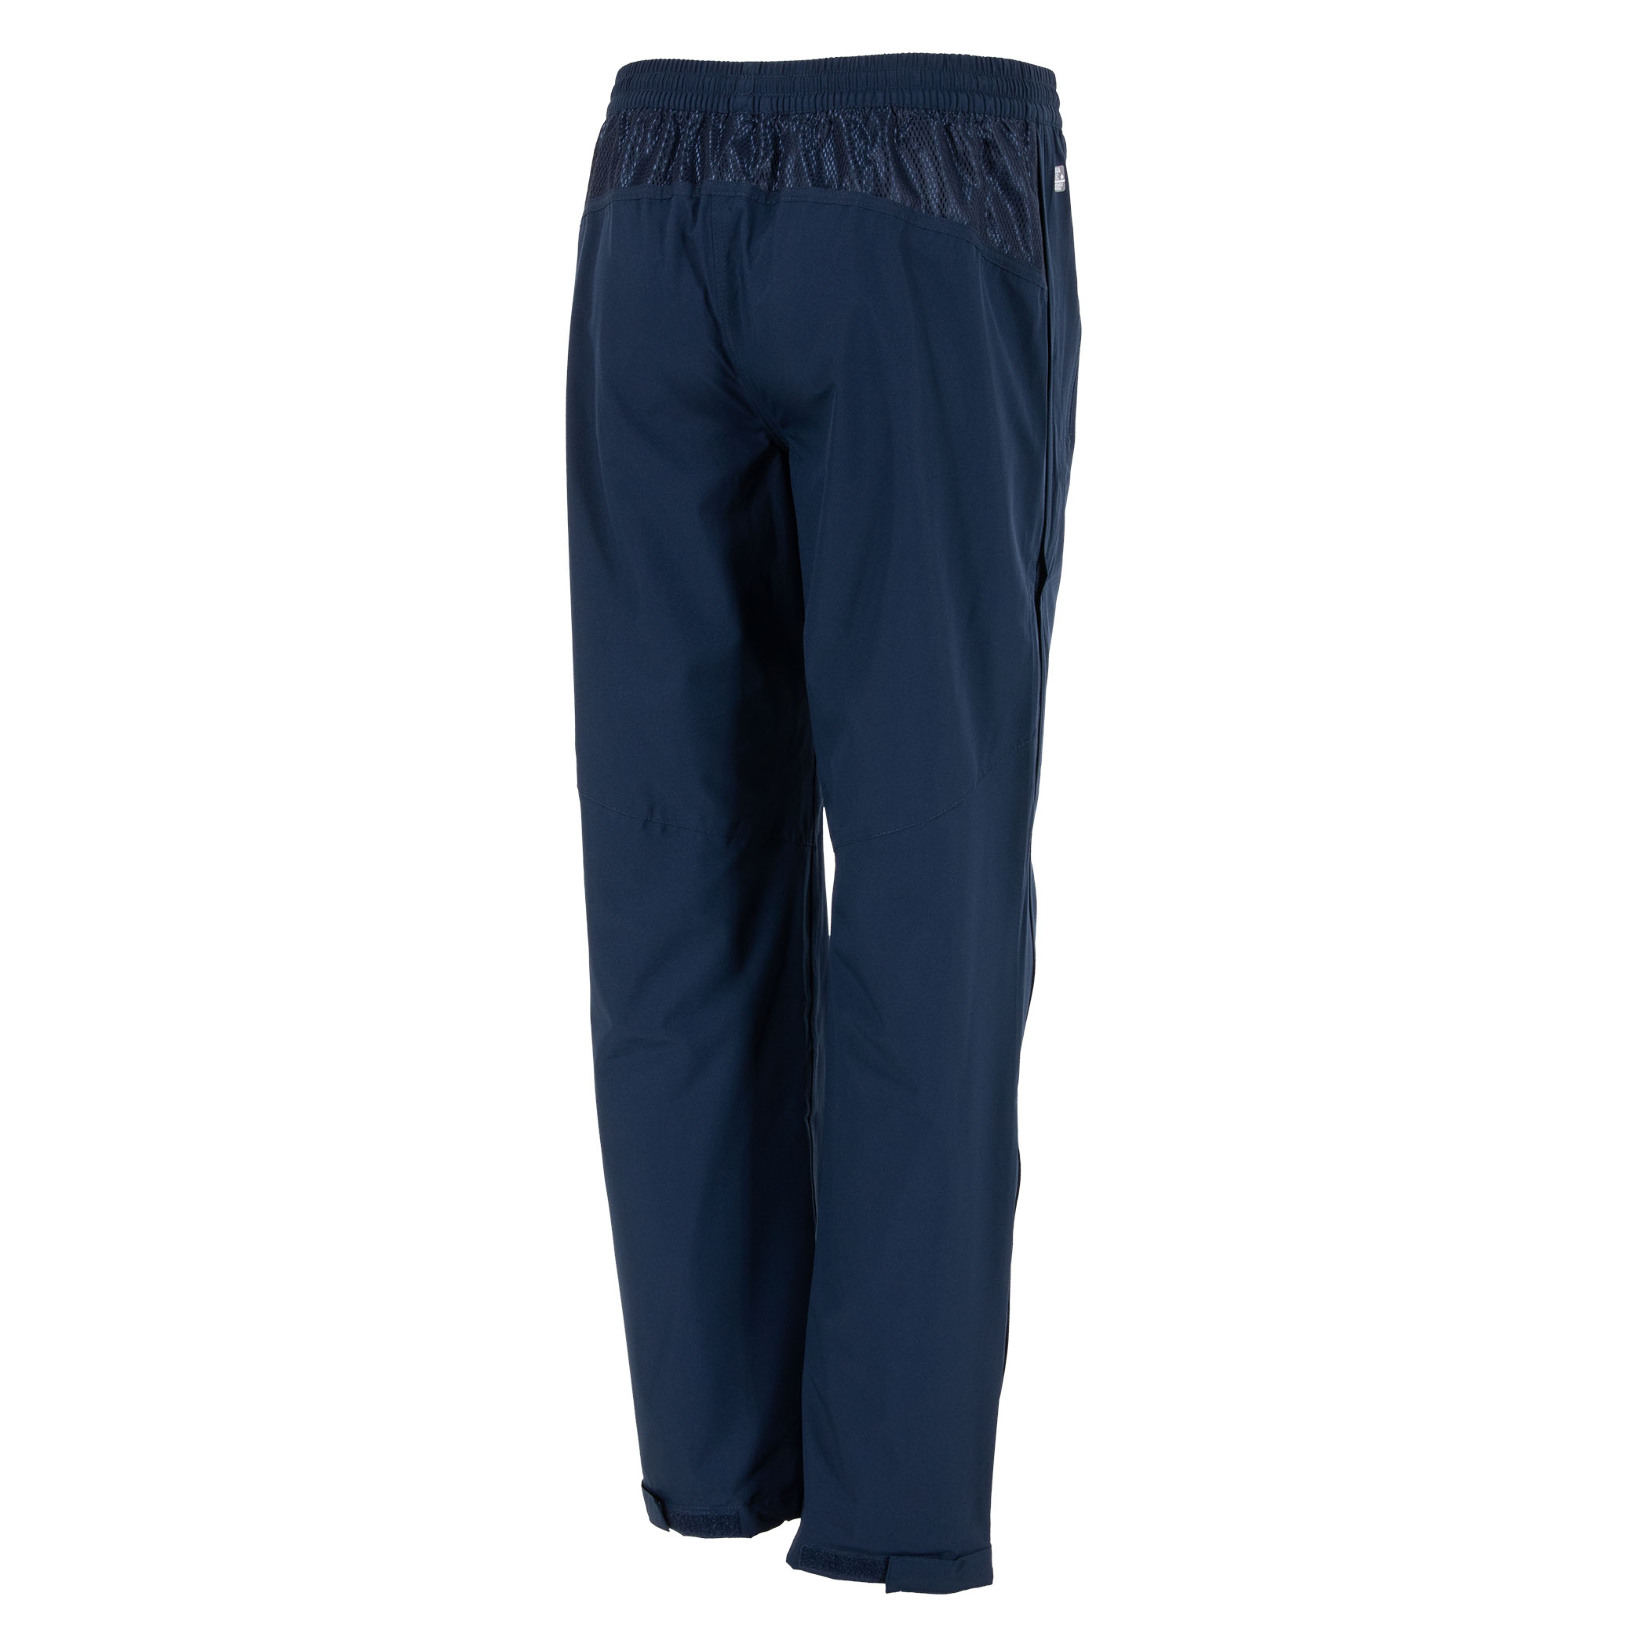 Reece Cleve Breathable Pants